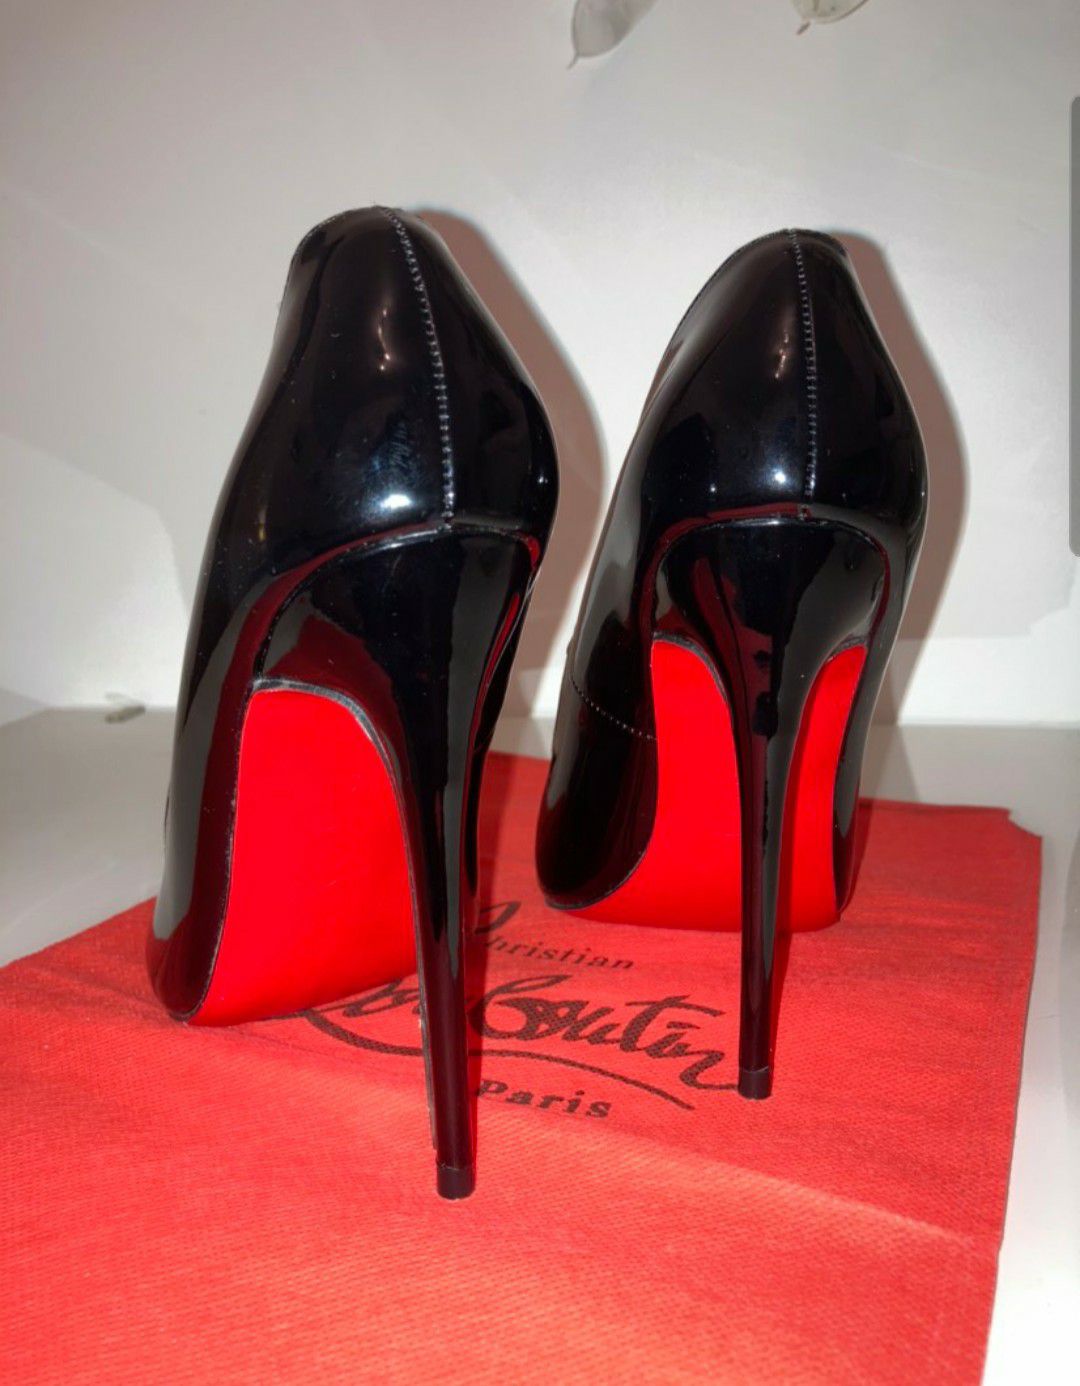 New So Kate pump pointed-toe Stiletto